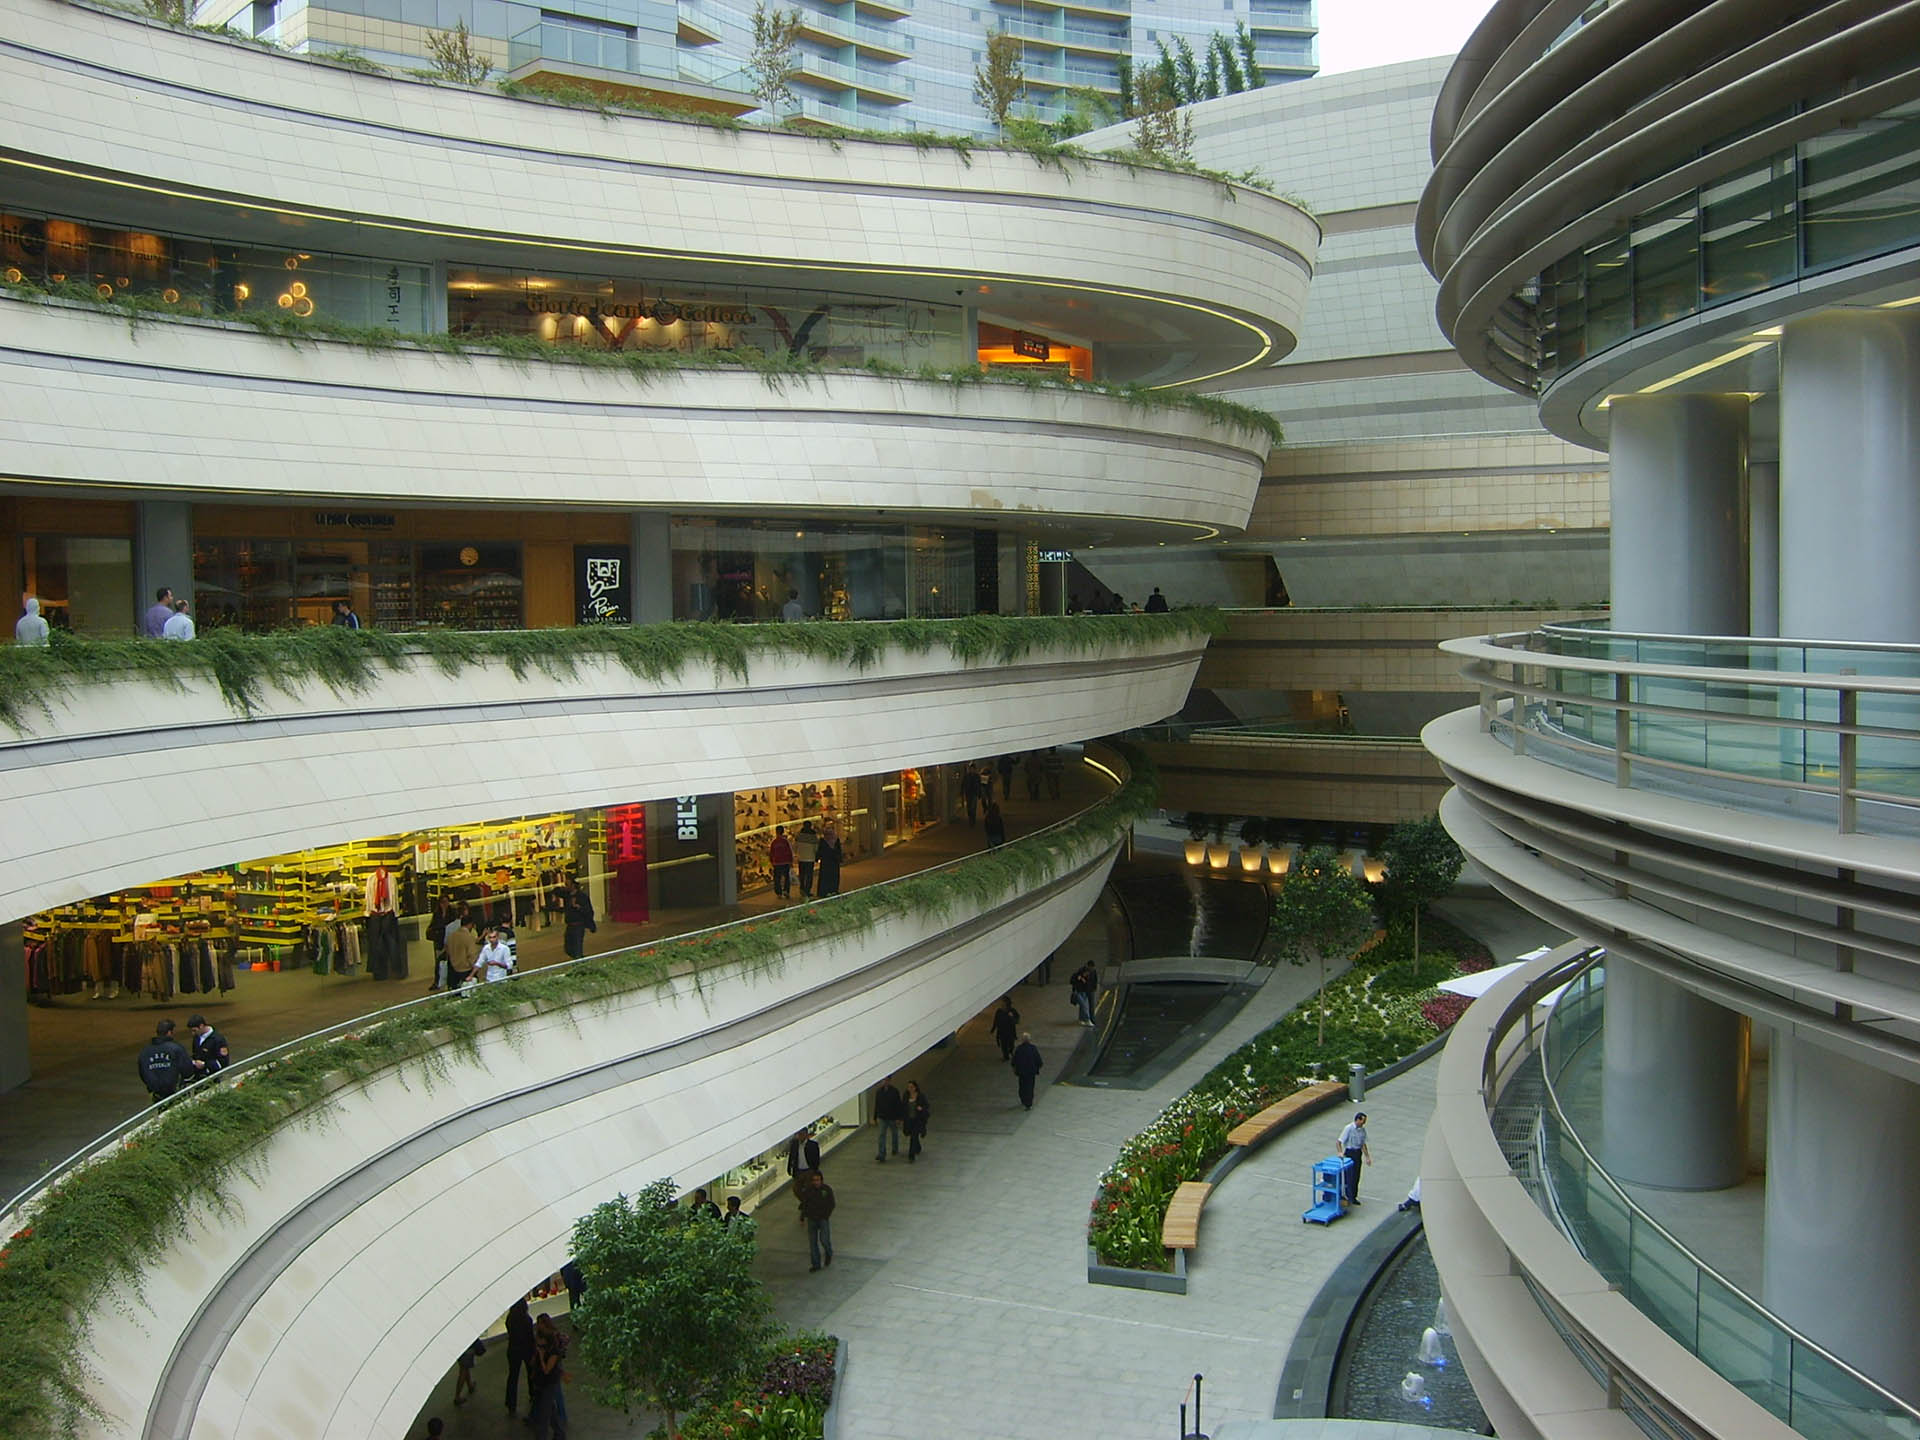 Kanyon Shopping Center: Istanbul's Architectural Marvel